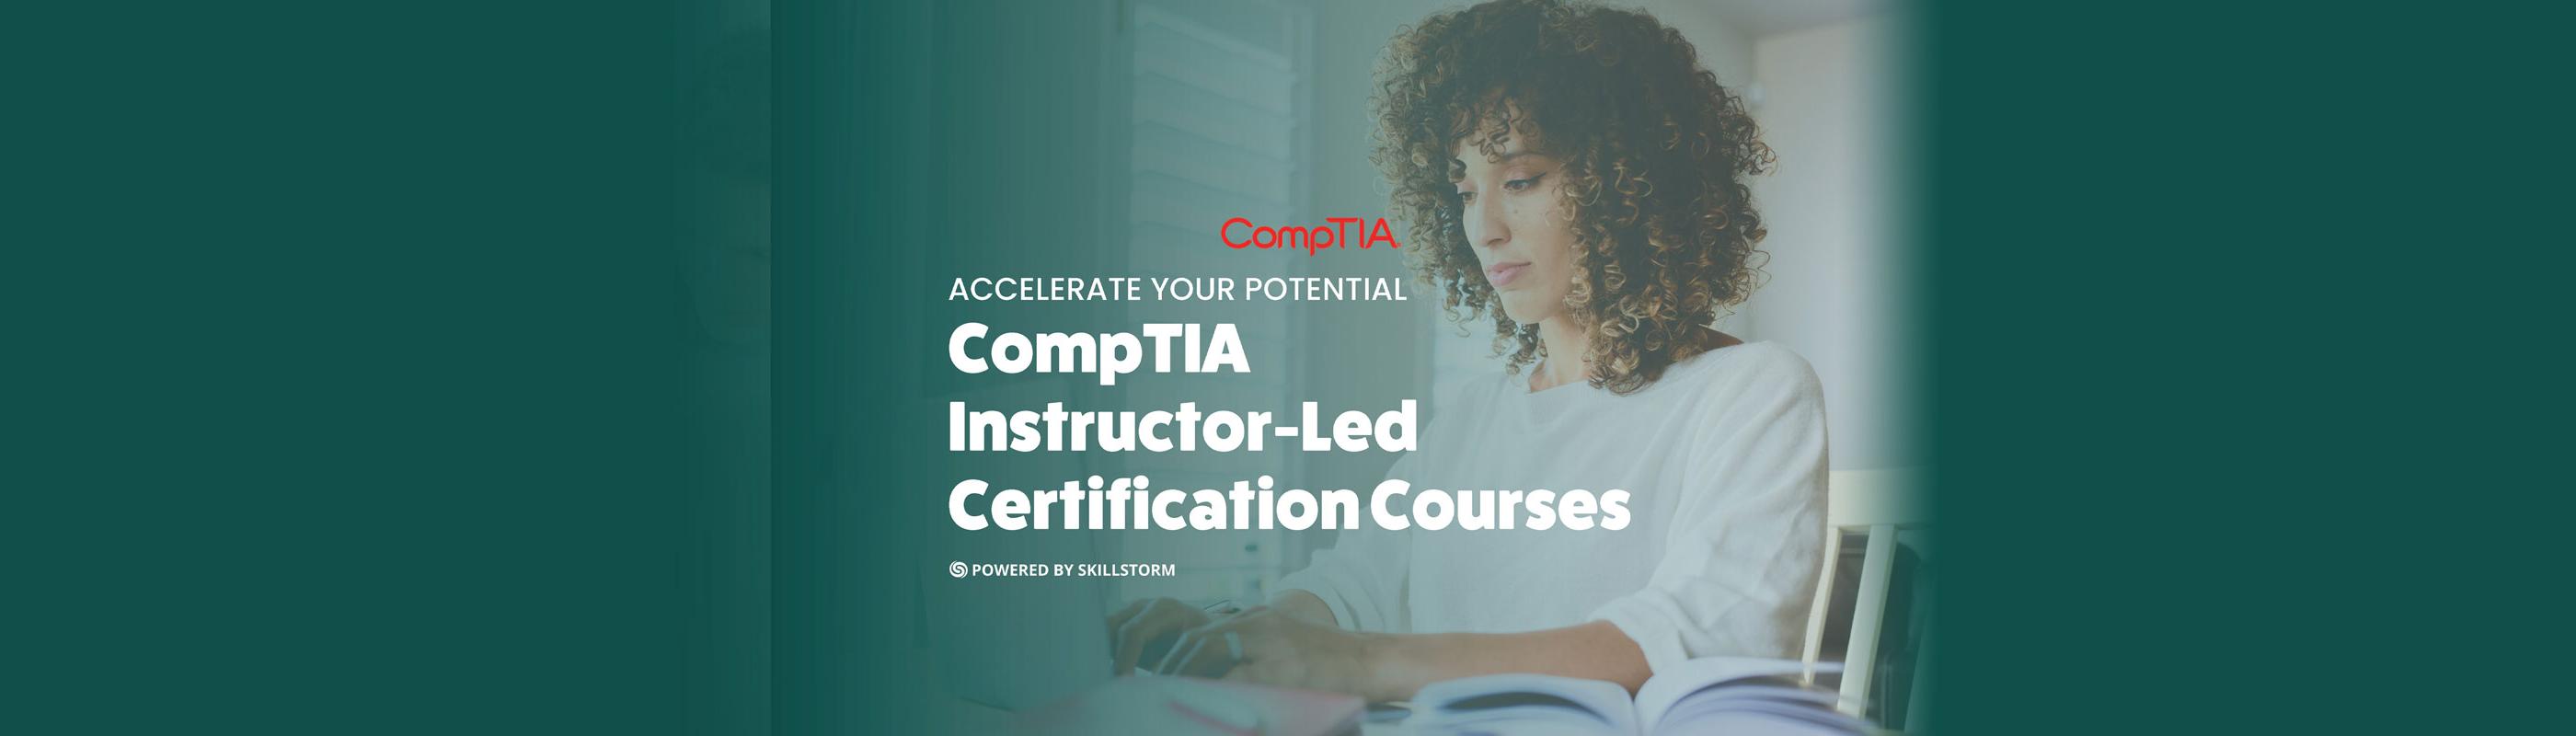 CompTIA Instructor-Led Certification Courses powered by SkillStorm